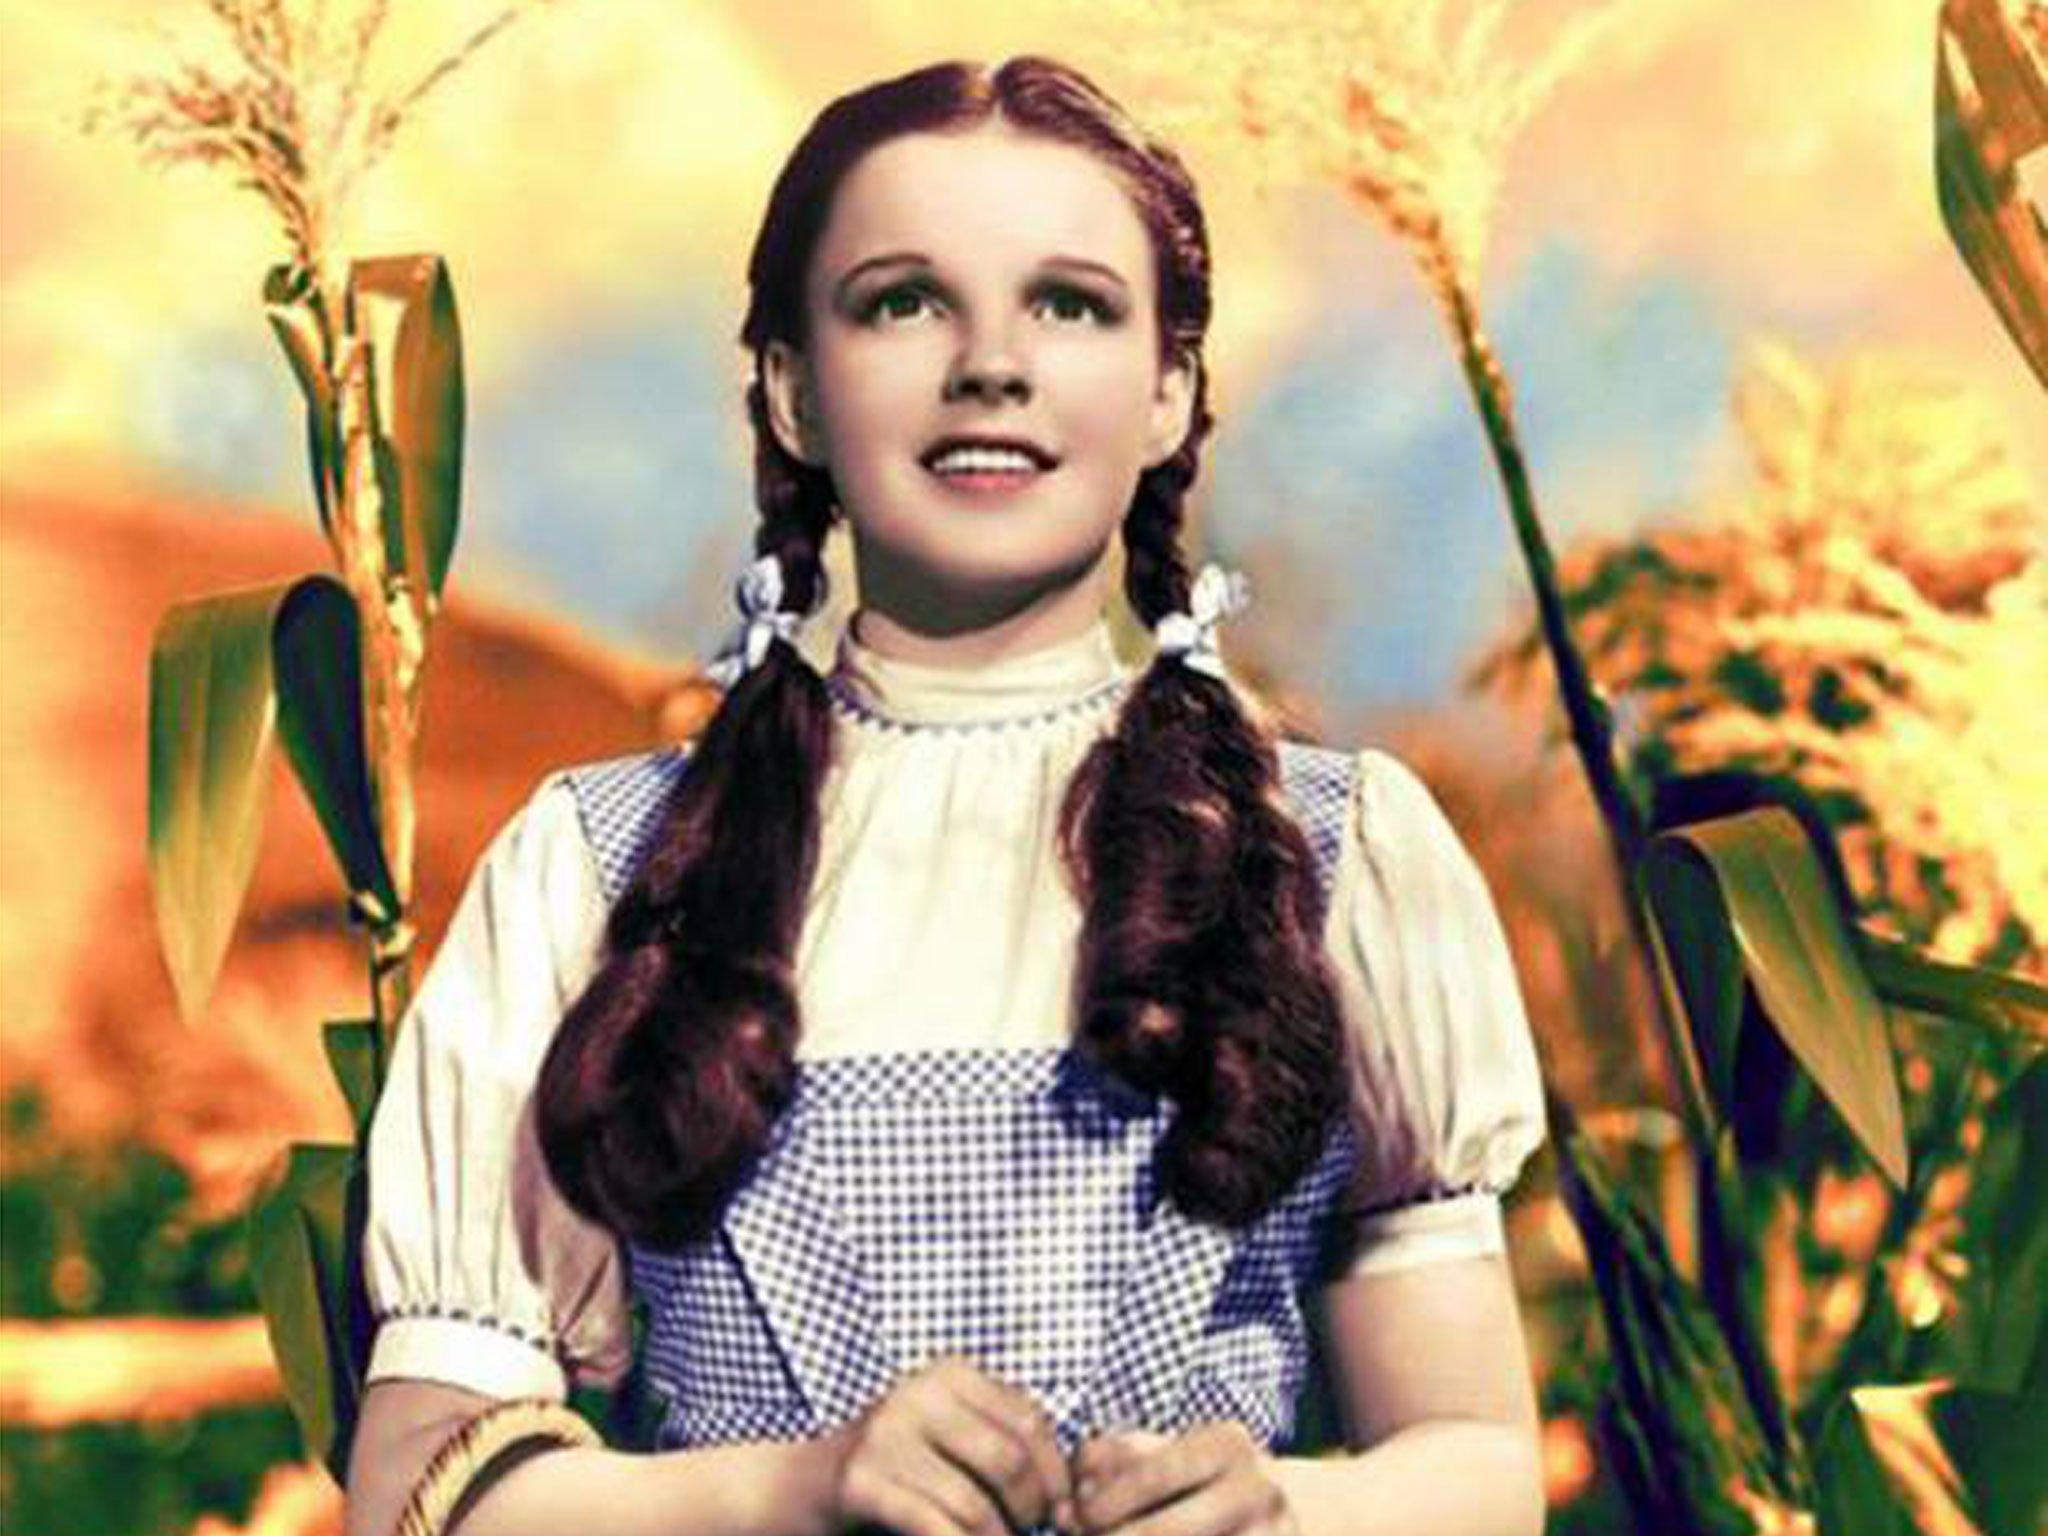 Judy Garland's dress from The Wizard of Oz expected to sell